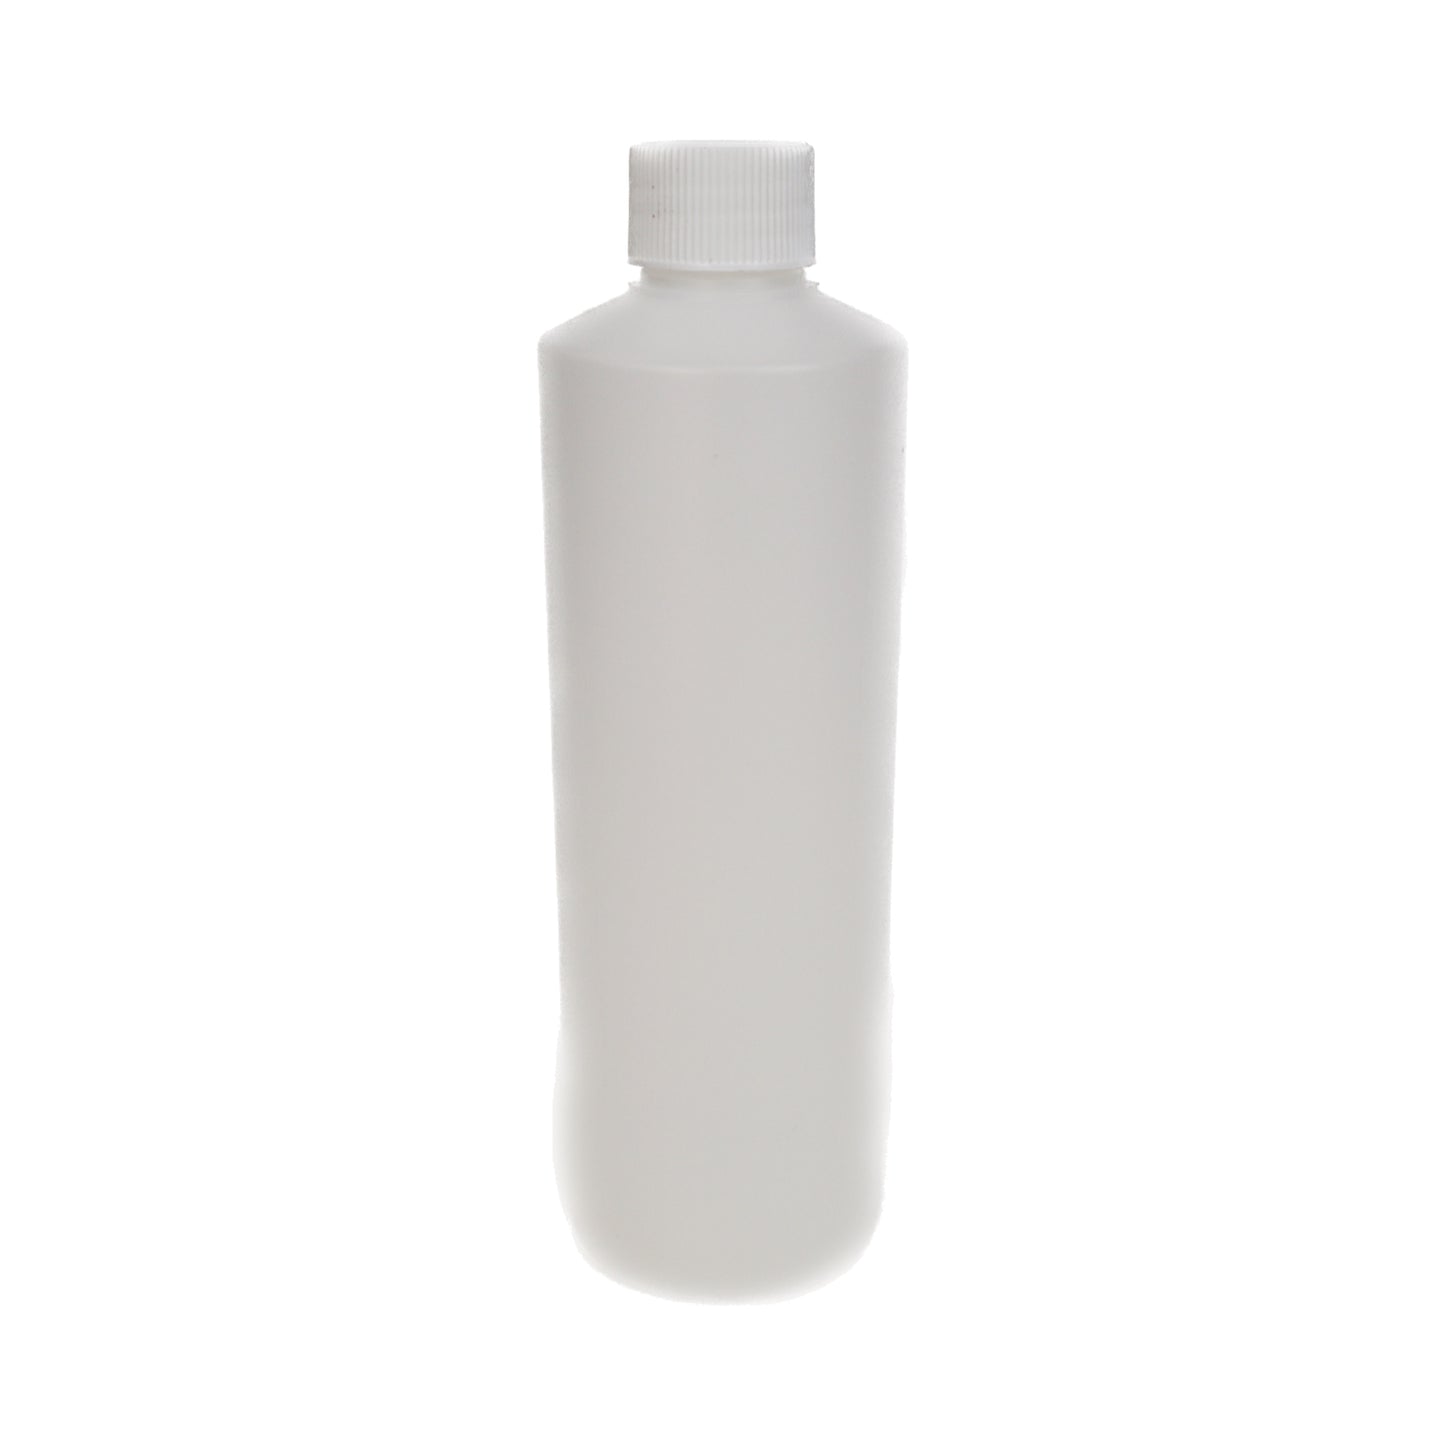 Spray bottle with lid